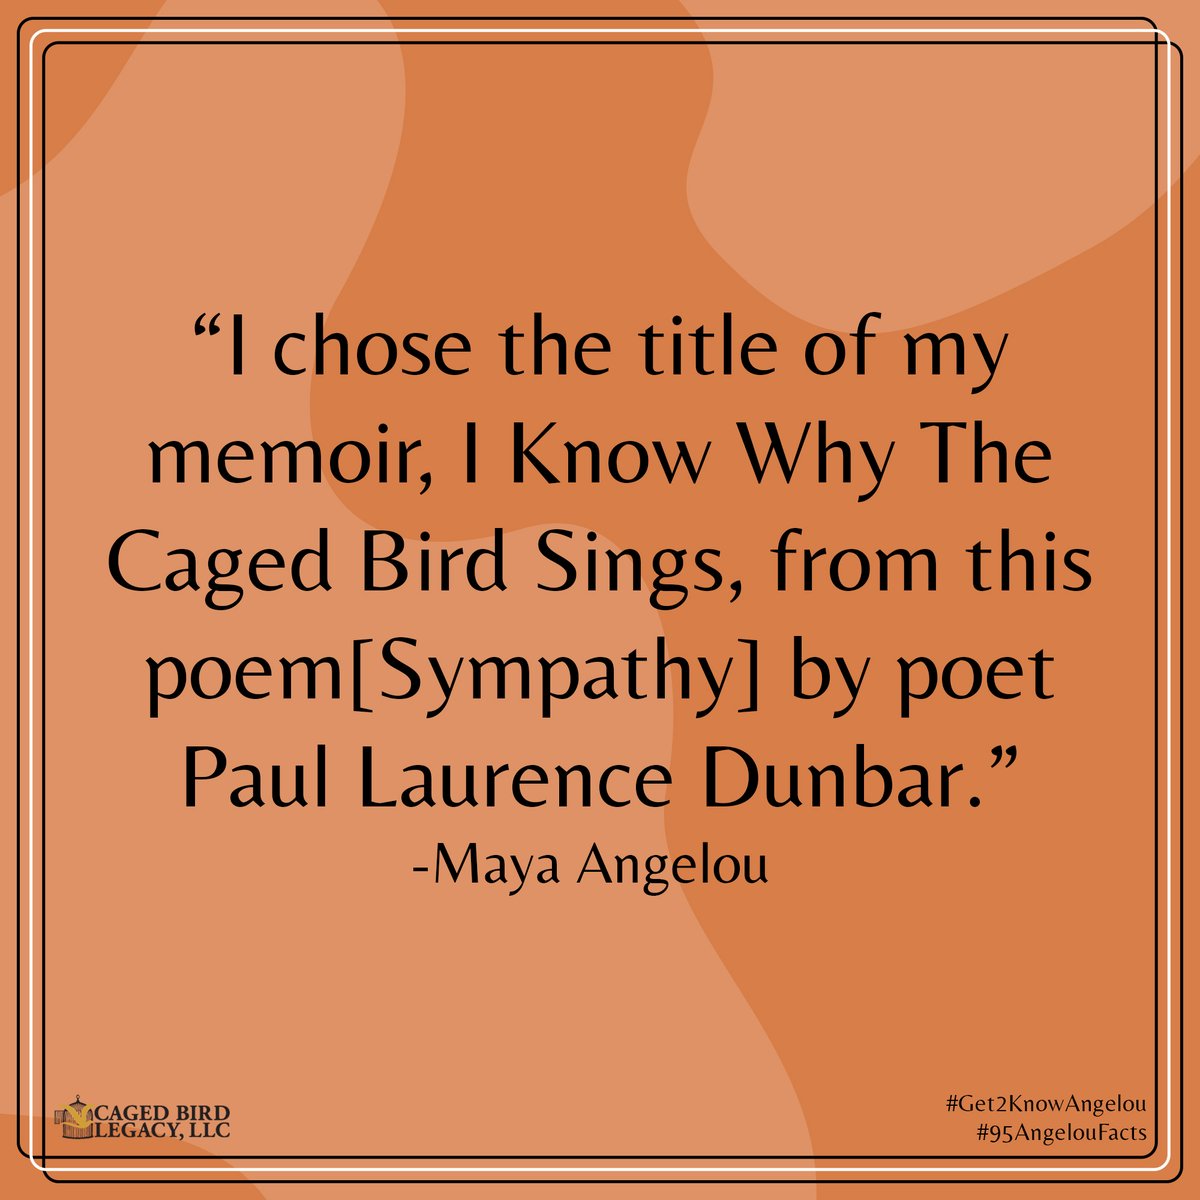 “I chose the title of my memoir, I Know Why The Caged Bird Sings, from this poem[Sympathy] by poet Paul Laurence Dunbar.” #MayaAngelou #NationalPoetryMonth #Get2KnowAngelou #95AngelouFacts #DrAngelou95 loom.ly/XIvKLzU